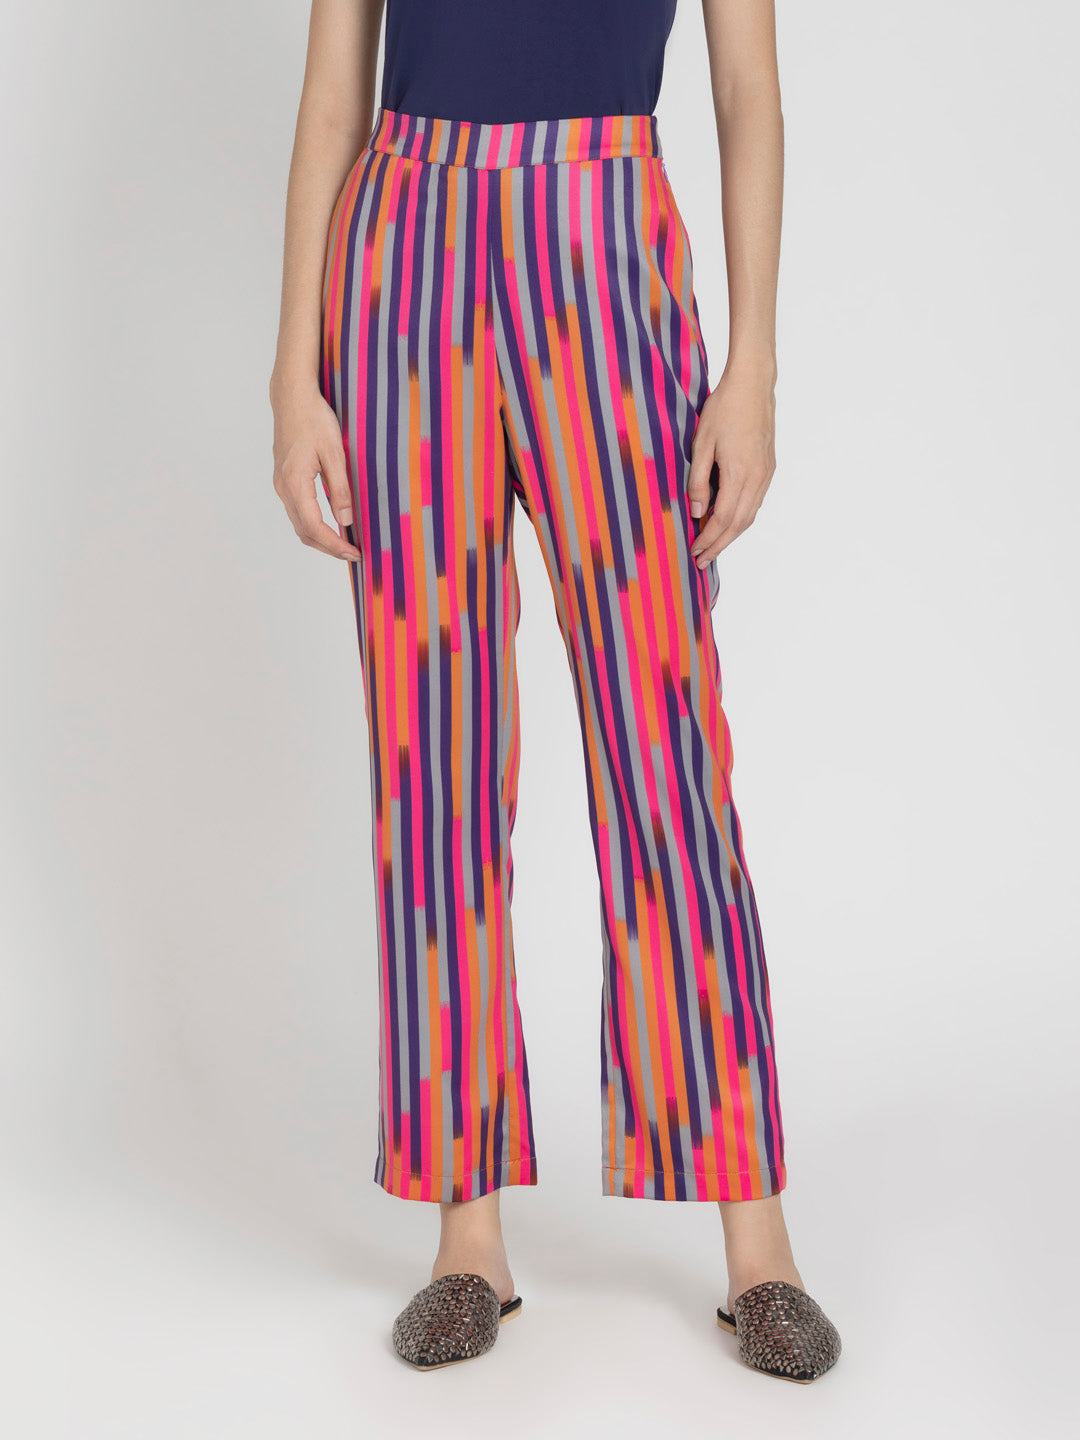 Luxe Striped Pant from Shaye , Pants for women